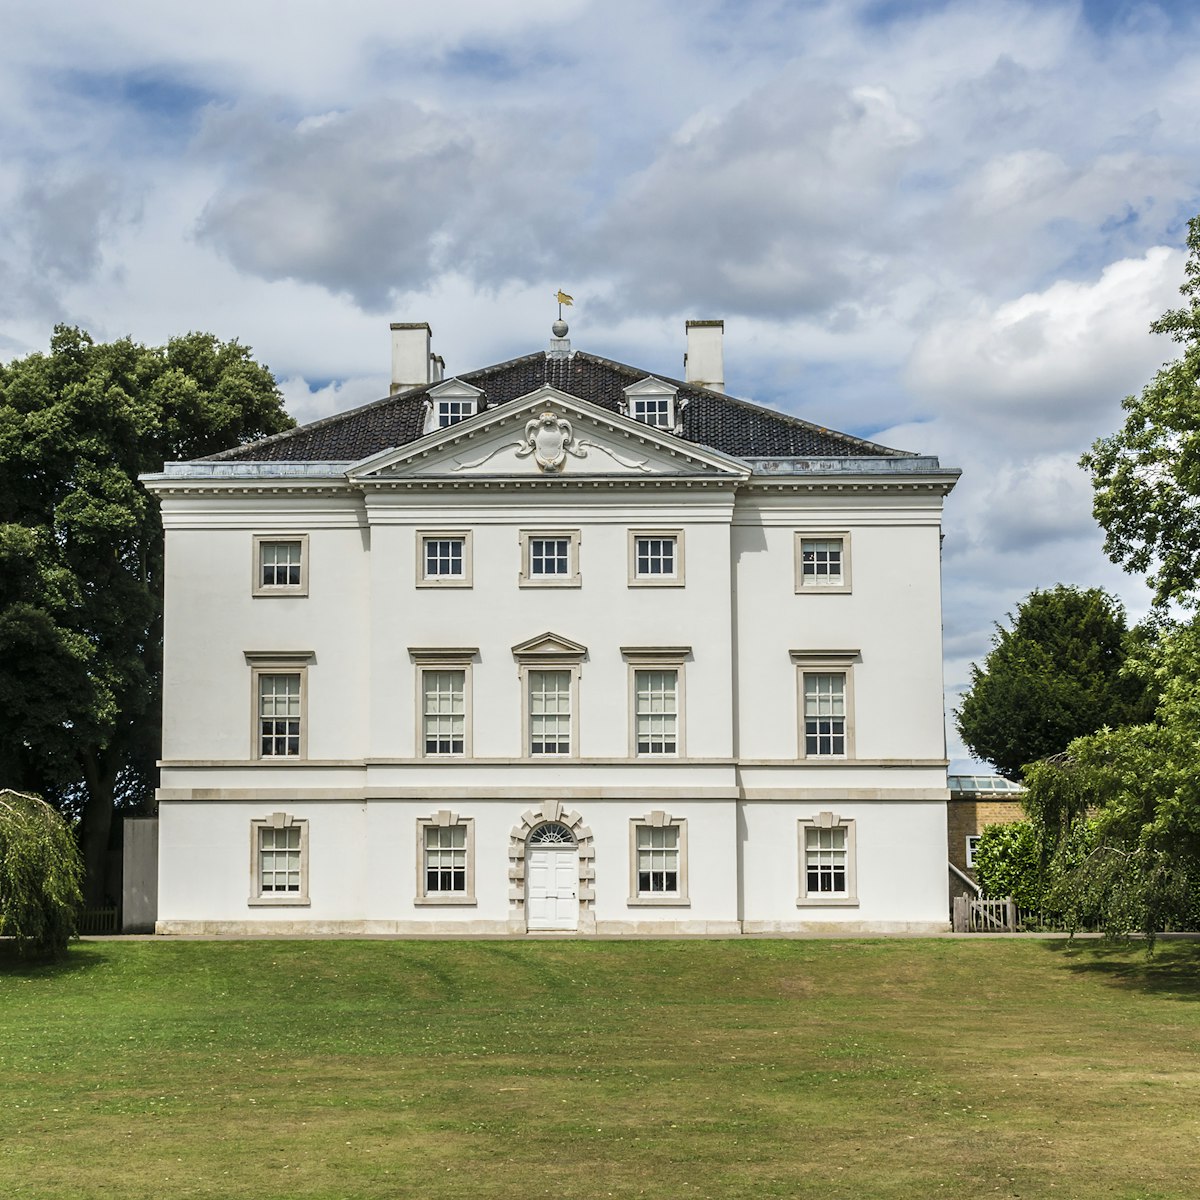 Marble Hill House is on northern banks of River Thames, situated halfway between Richmond and Twickenham, UK. 